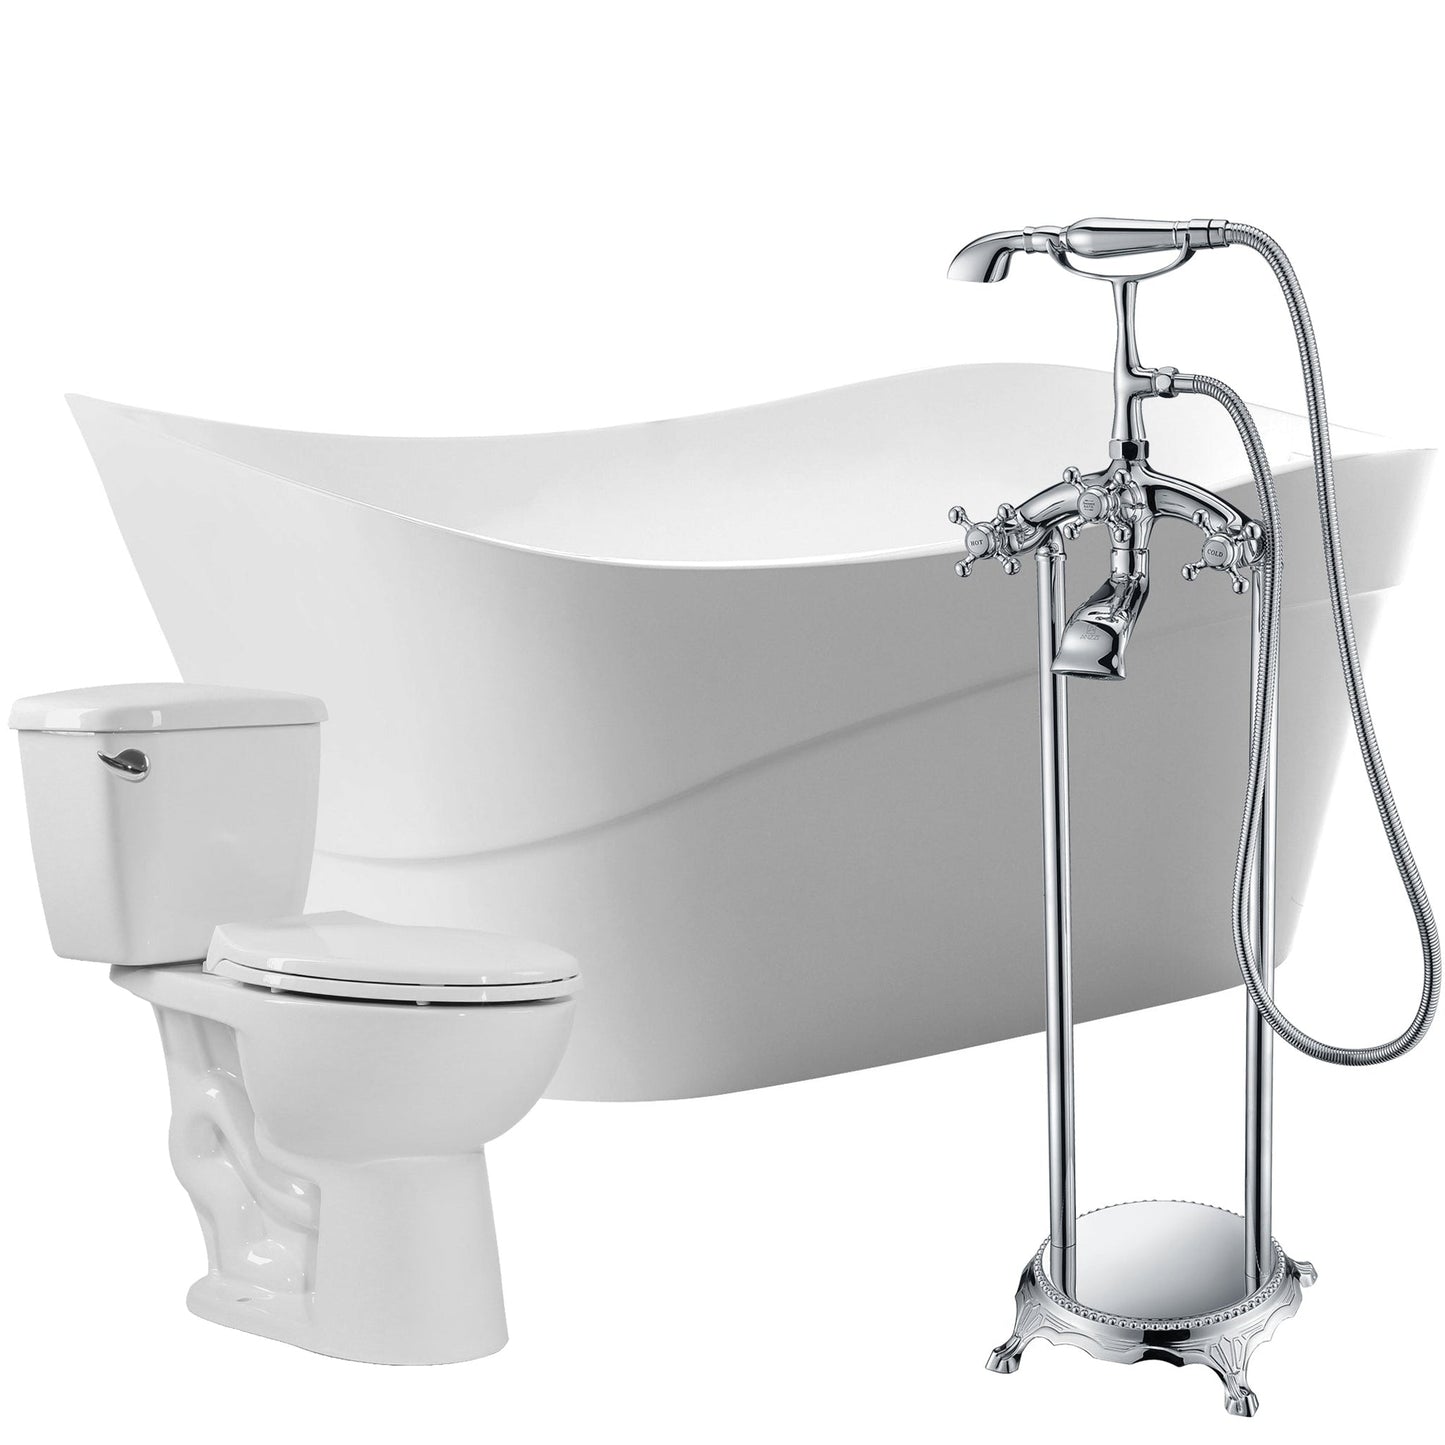 ANZZI Kahl Series 67" x 32" Glossy White Freestanding Bathtub With Tugela Bathtub Faucet and Cavalier Toilet